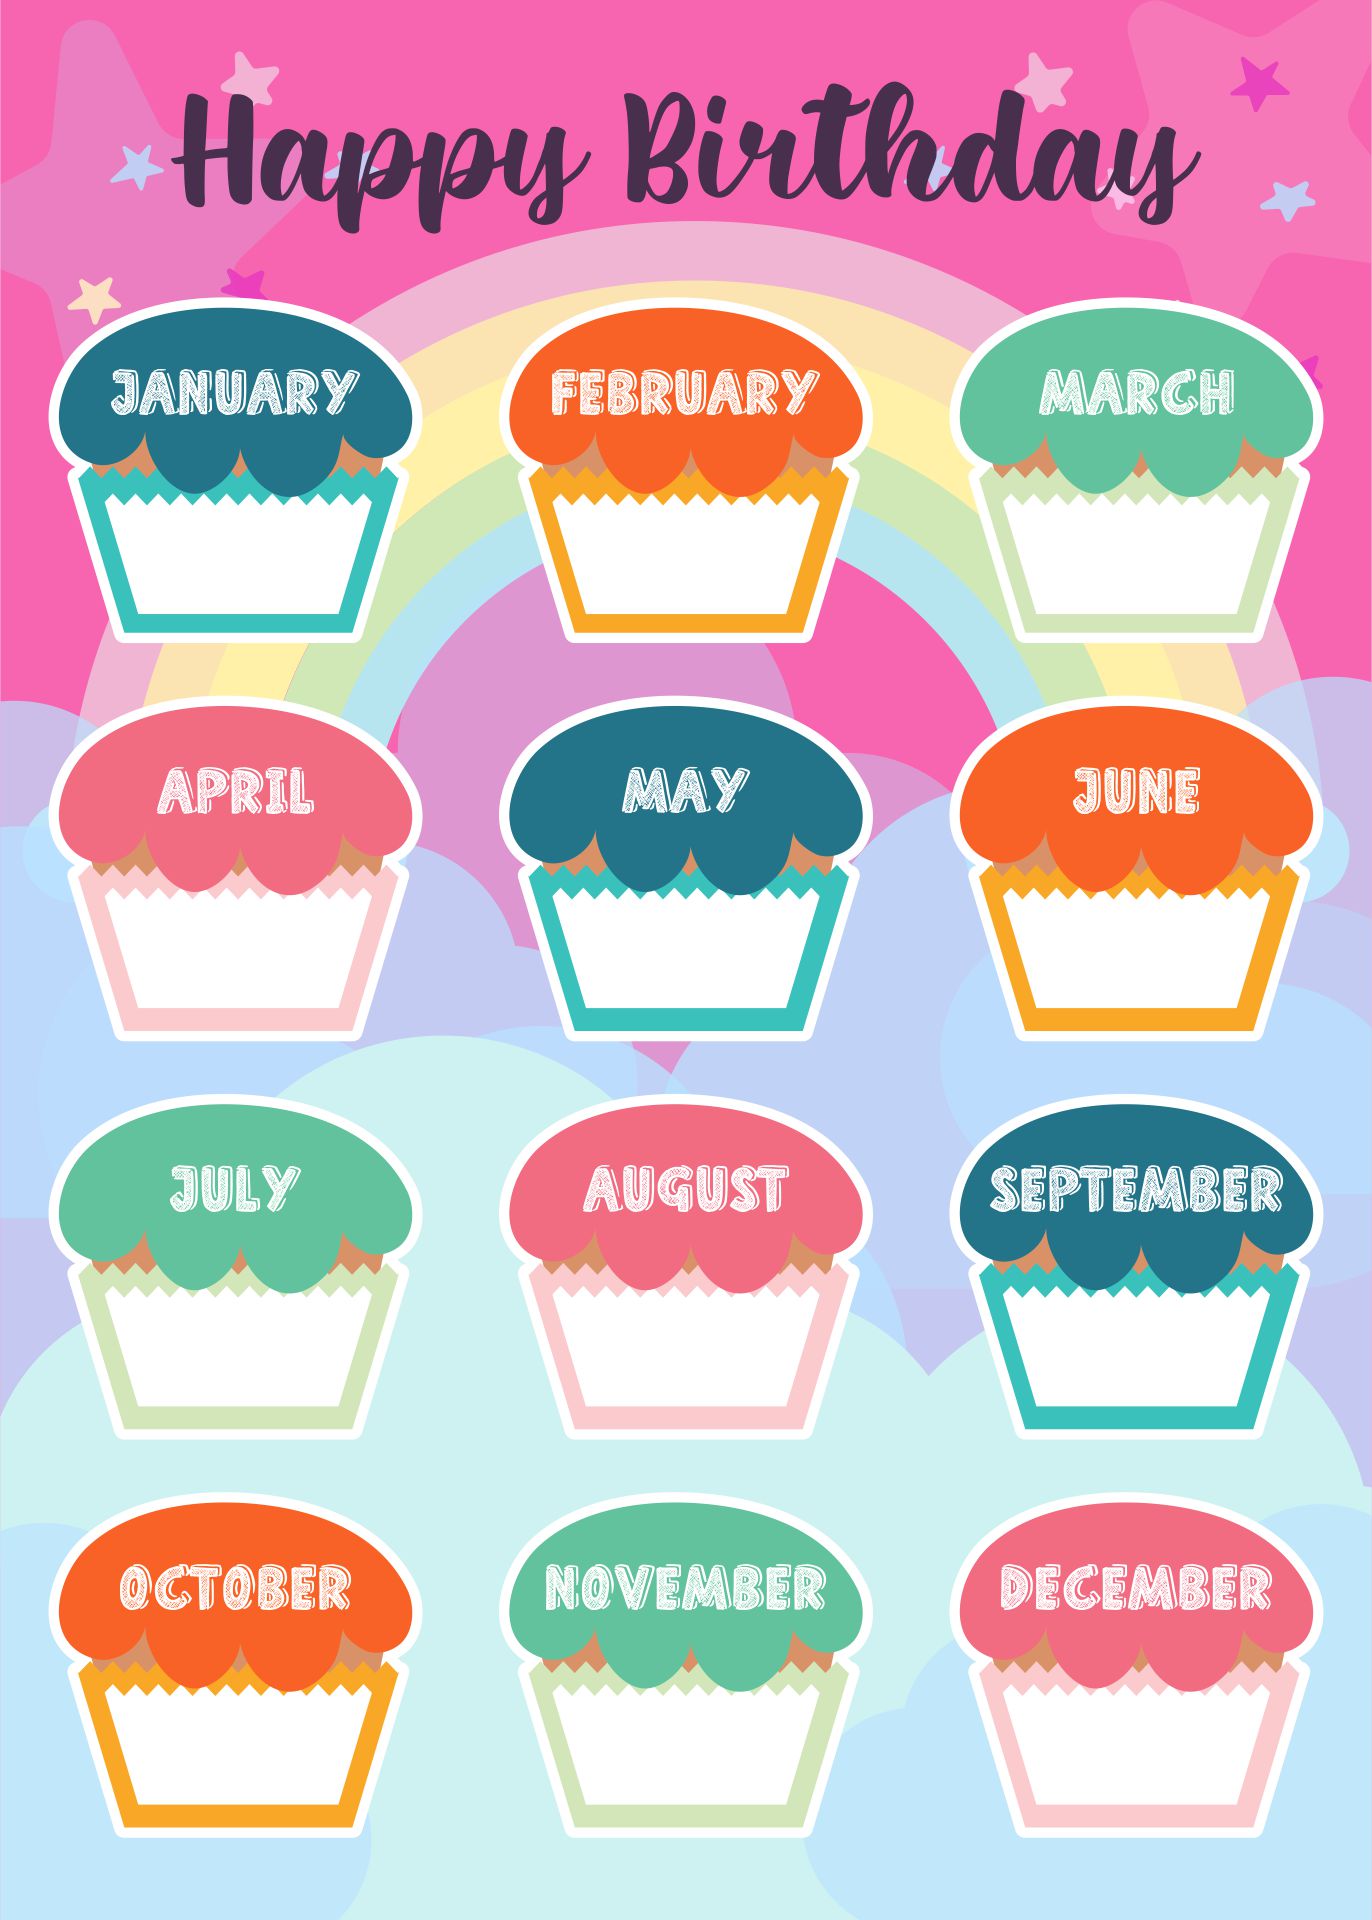 7-best-images-of-cupcake-birthday-printables-for-classroom-classroom-birthday-calendar